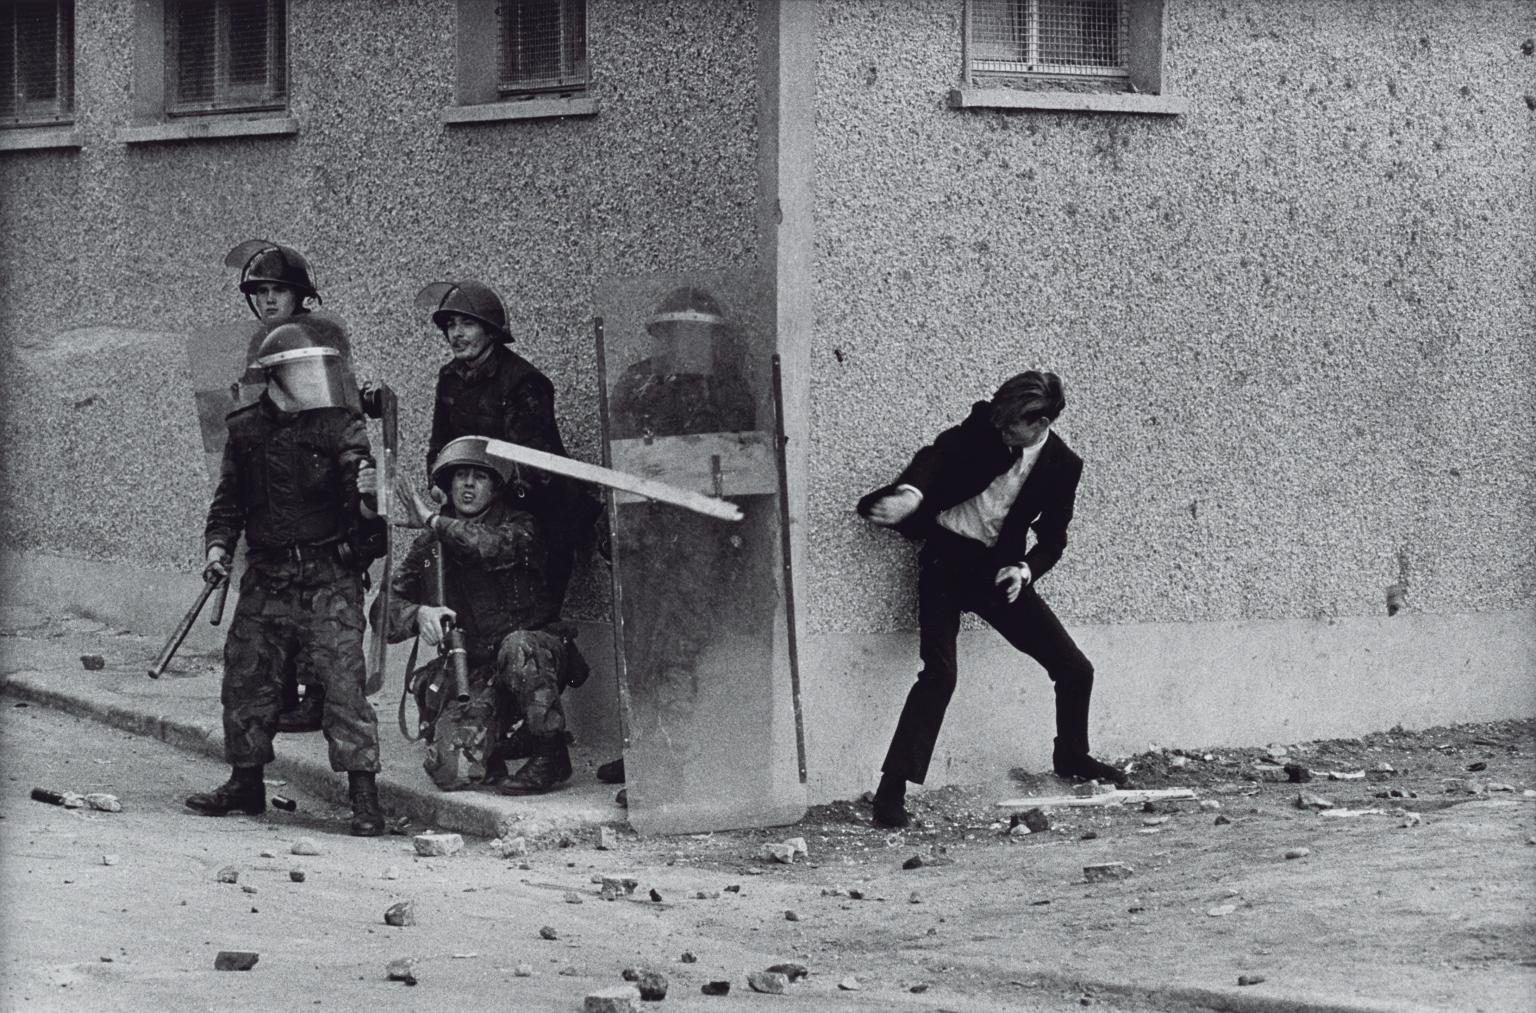 The Bogside, Londonderry, Northern Ireland 1971, printed 2013 by Don McCullin born 1935